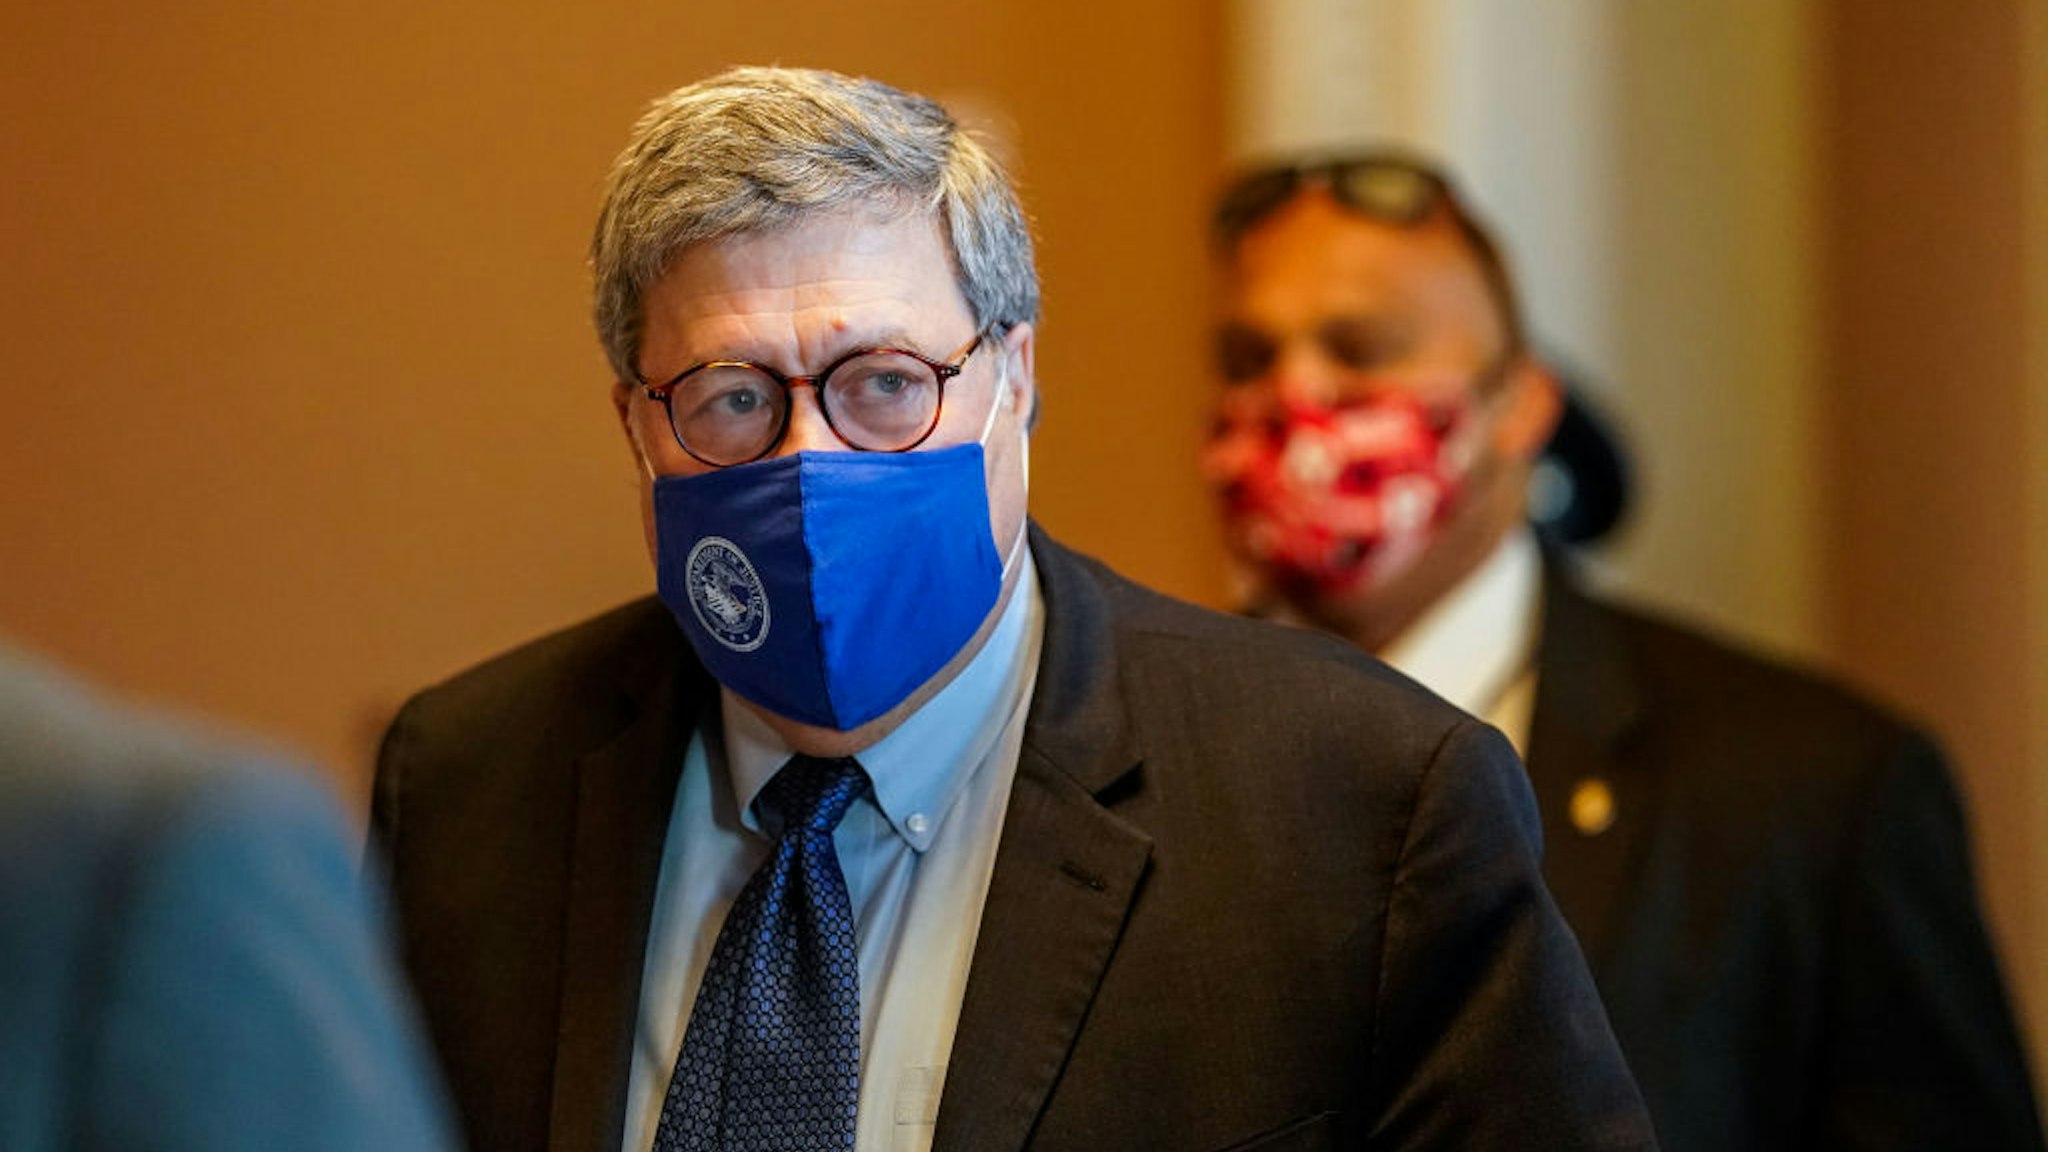 US Attorney General William Barr walks out from the office of Senate Majority Leader Mitch McConnell (D-KY) at the US Capitol Building on Monday, Nov. 9, 2020 in Washington, DC.